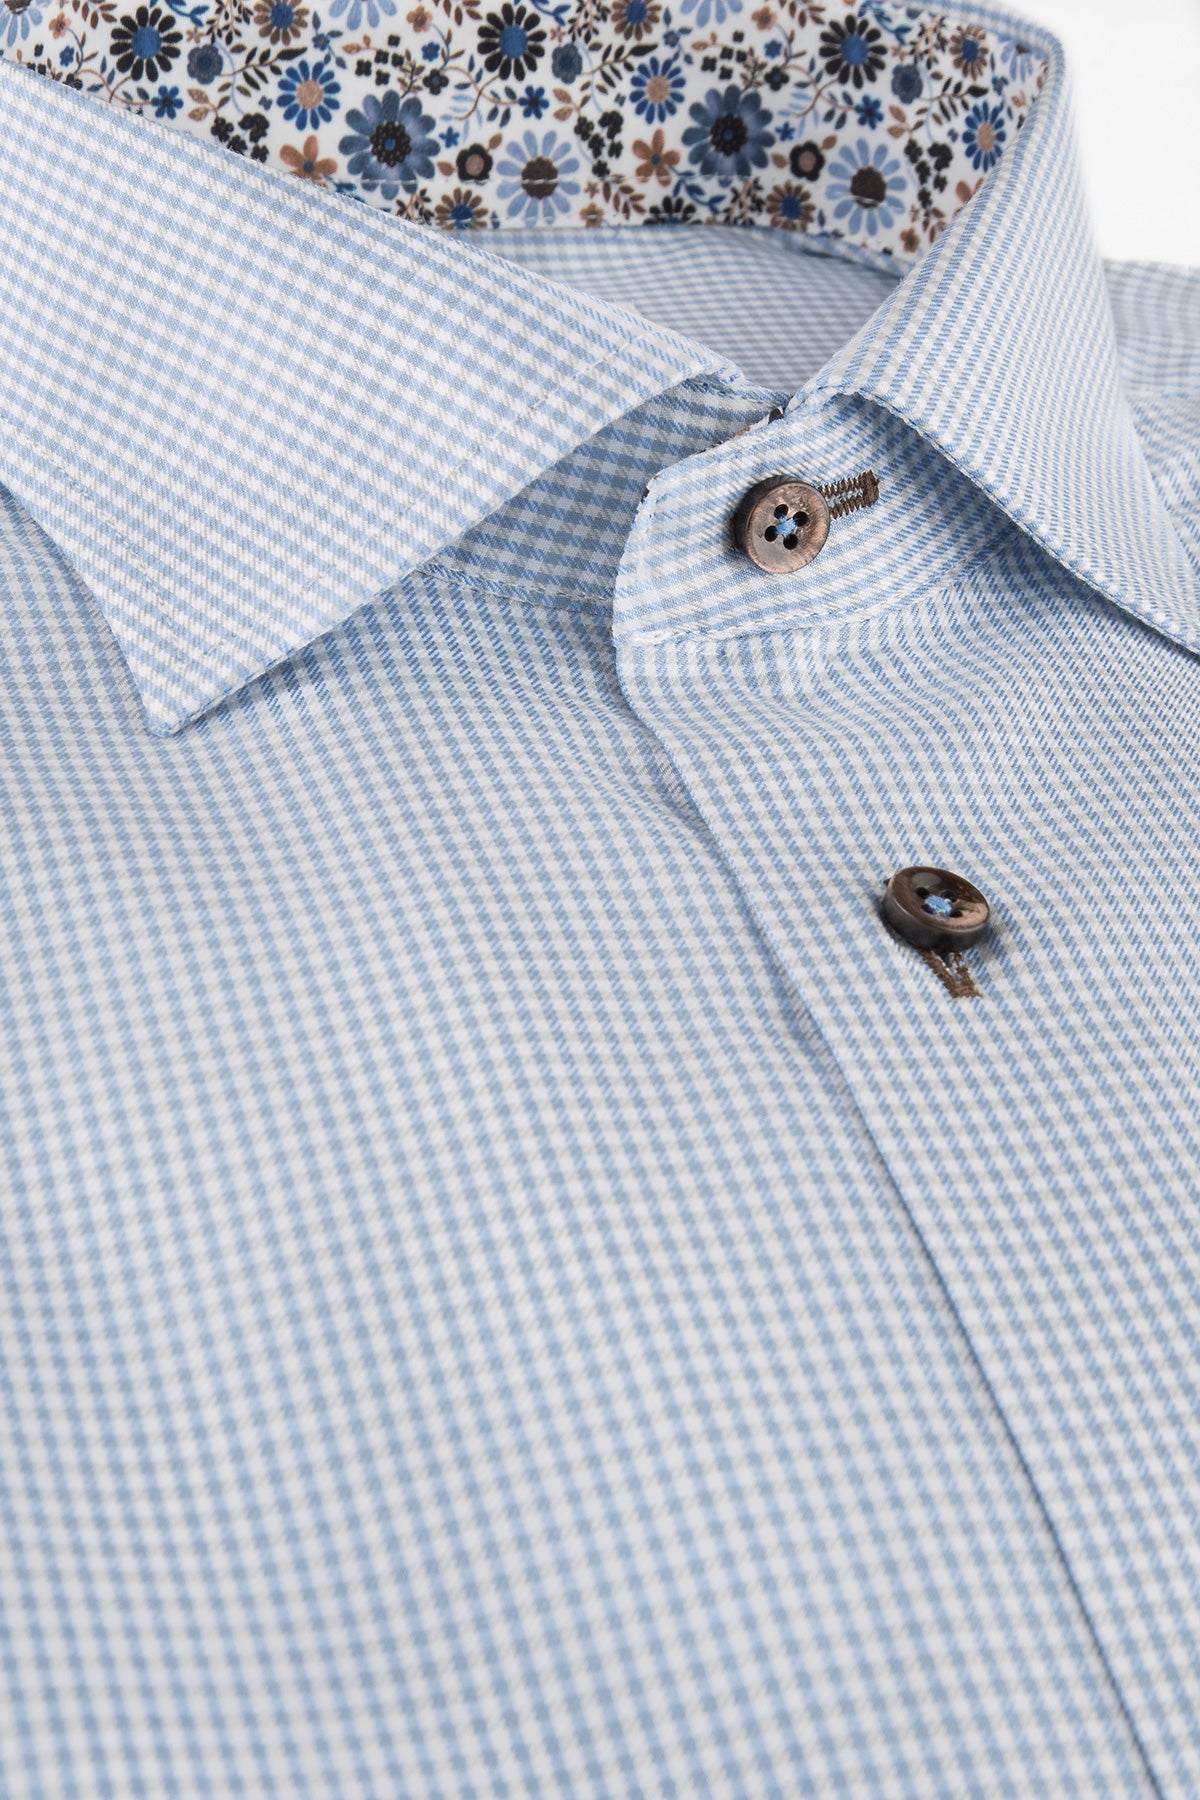 Light blue checked regular fit shirt with contrast details